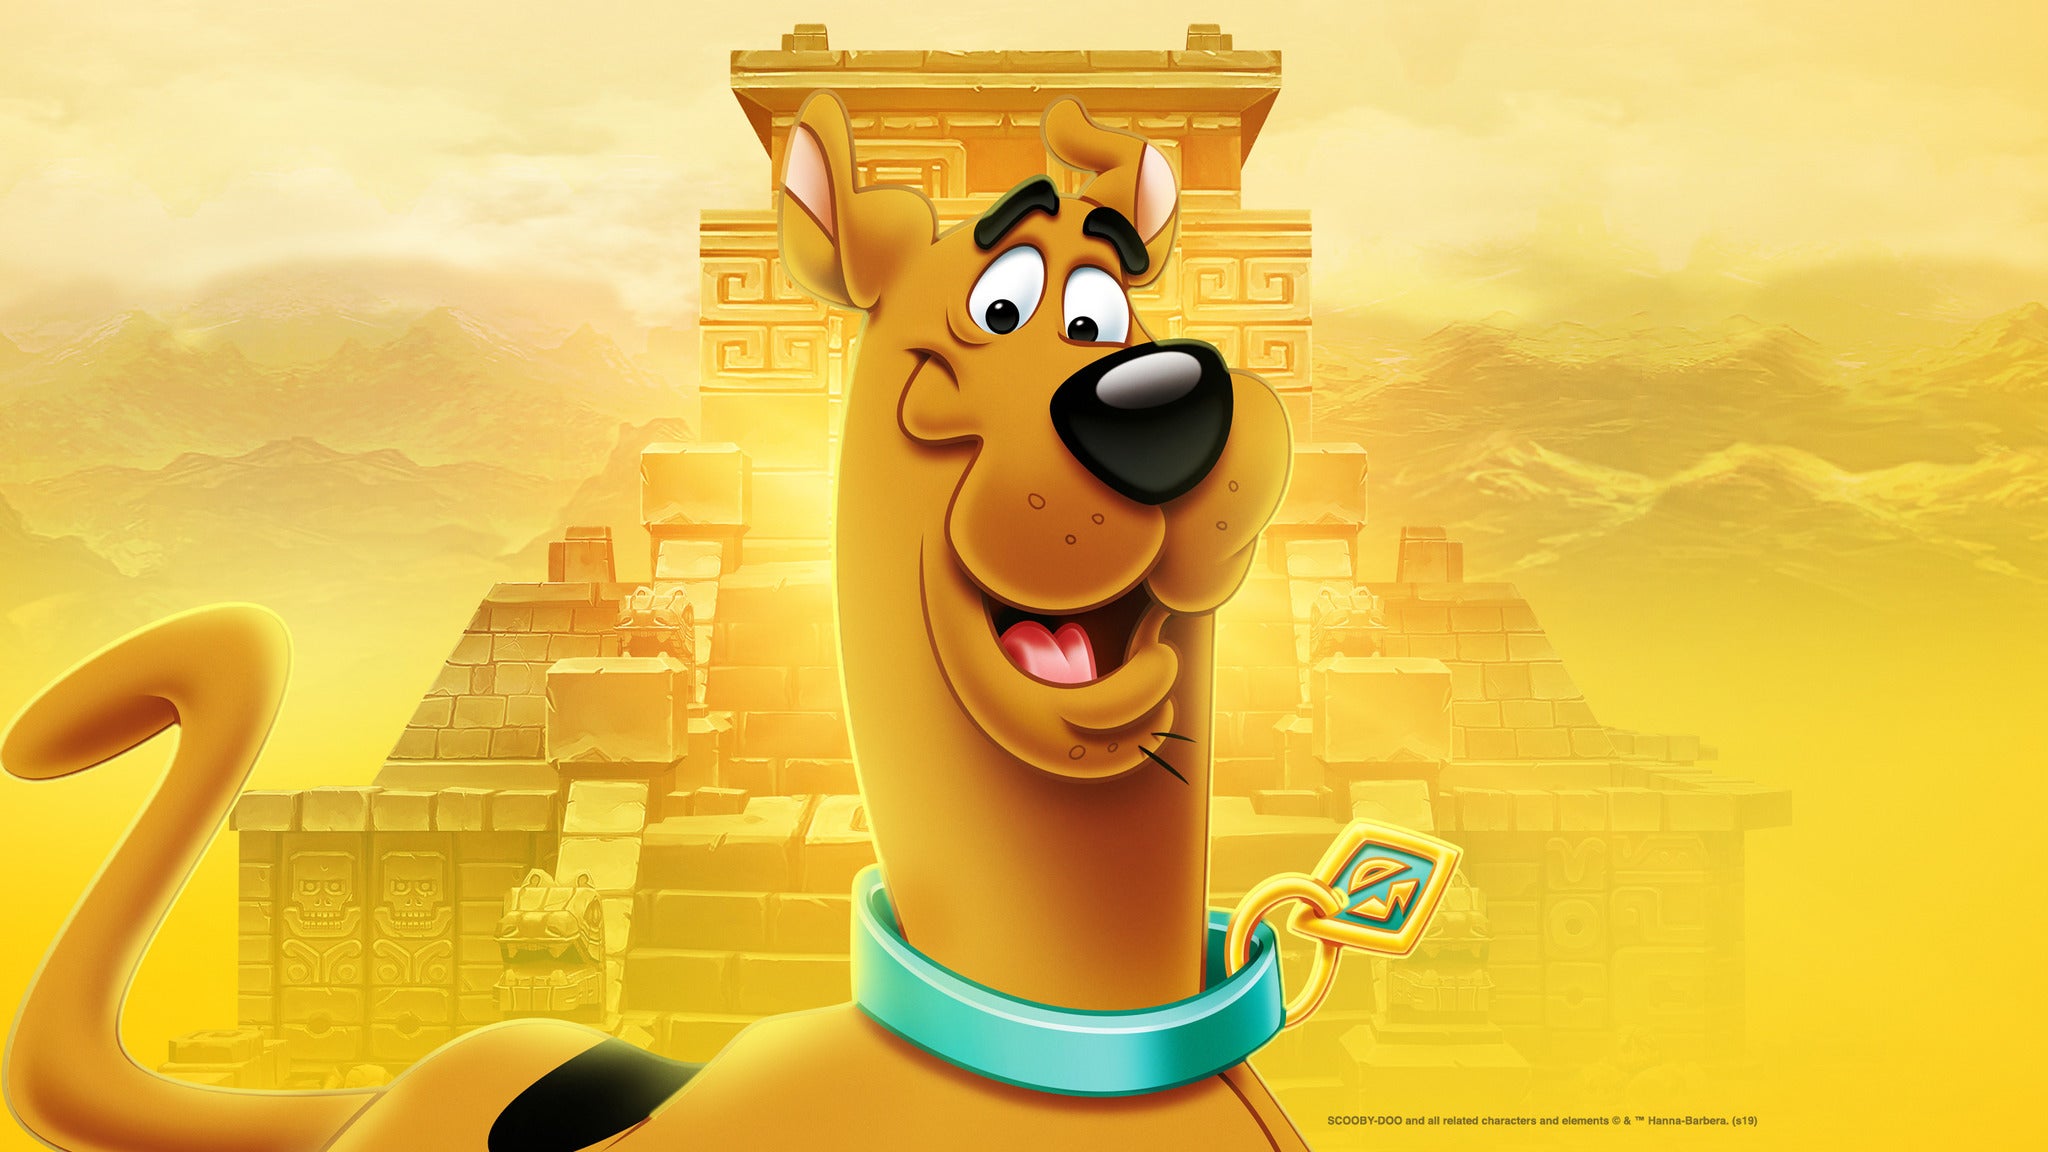 Scooby-Doo! and The Lost City of Gold (en anglais) in Laval promo photo for VIP Package presale offer code